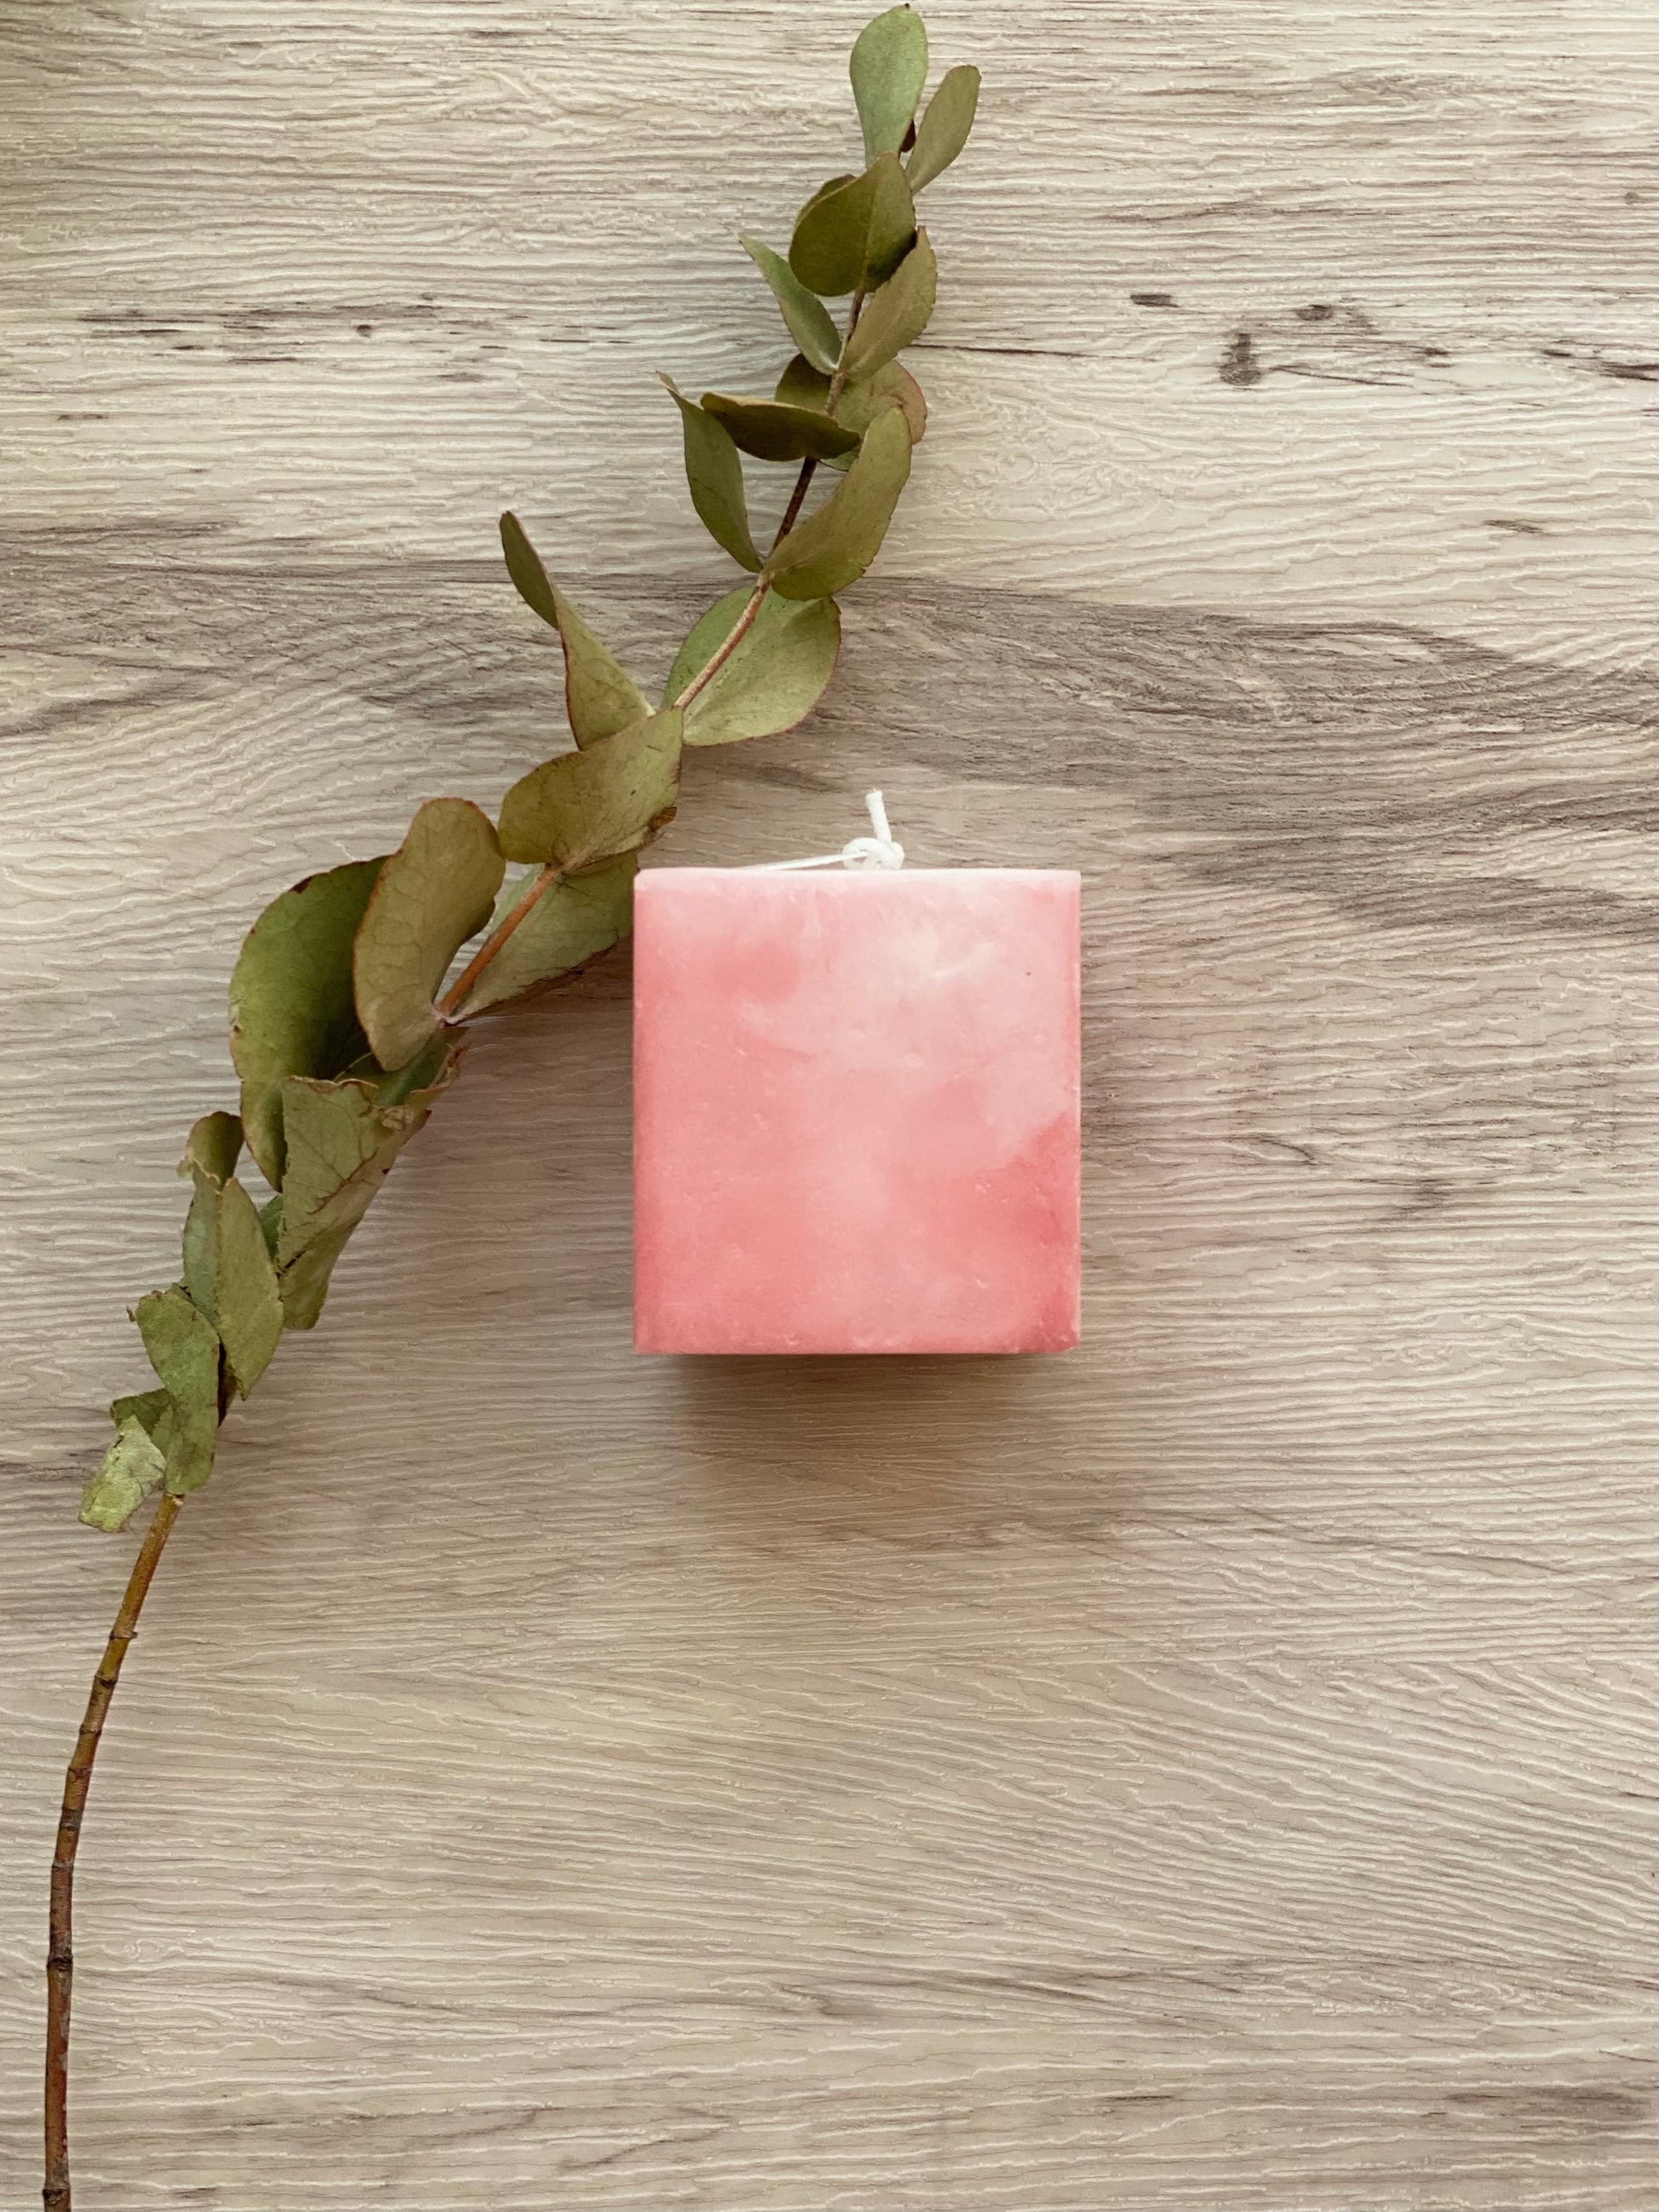 Small Cherry Blossom Candles